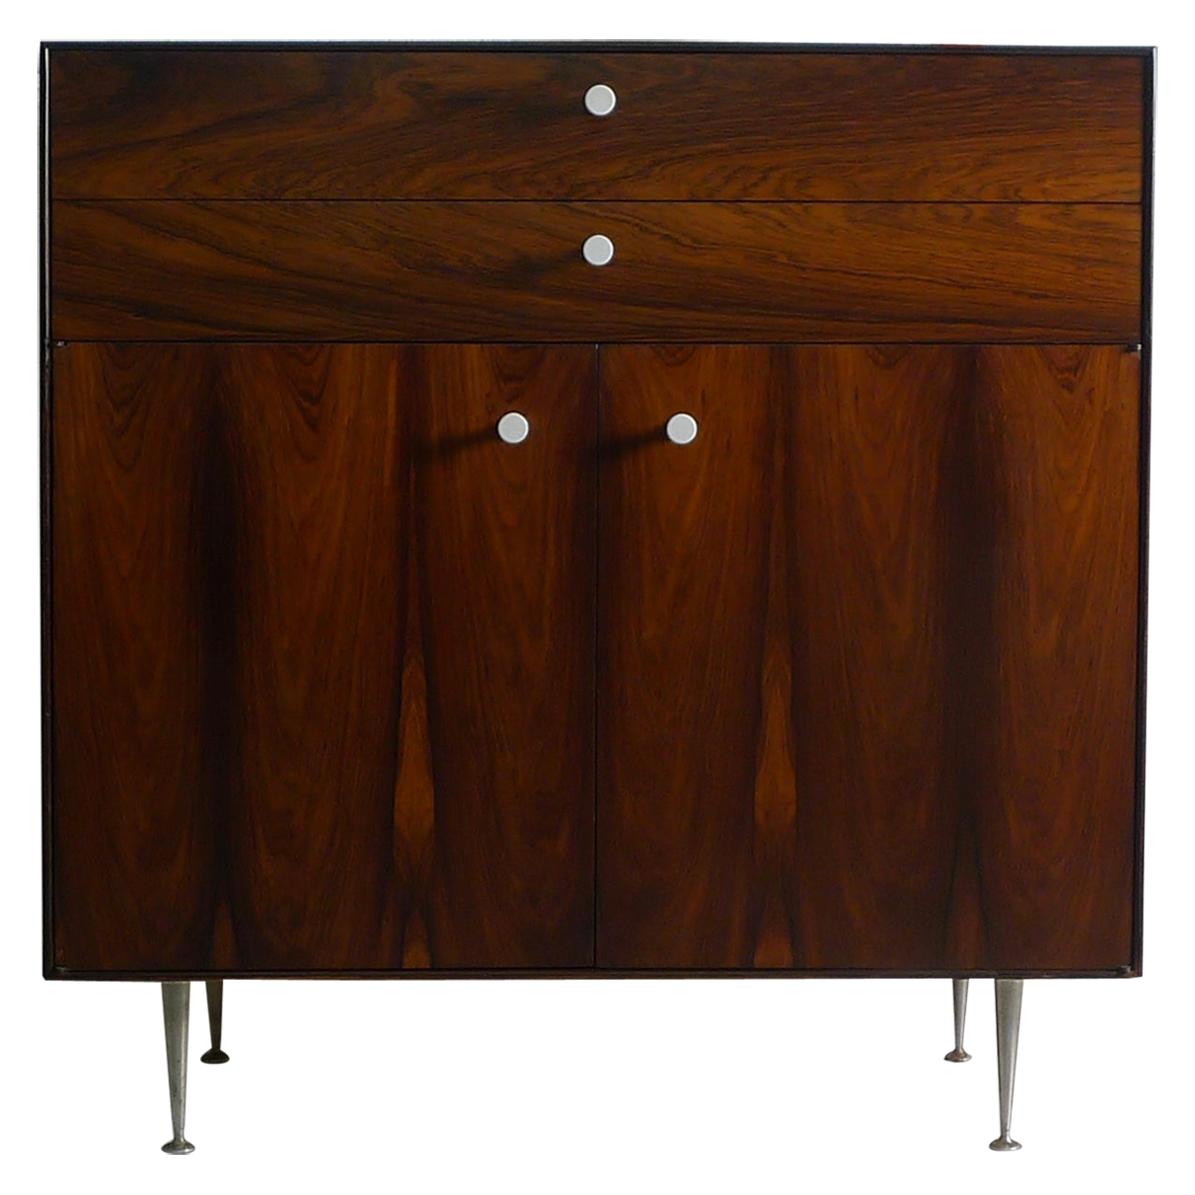 George Nelson Thin Edge Rosewood Cabinet, Herman Miller Label, 1950's